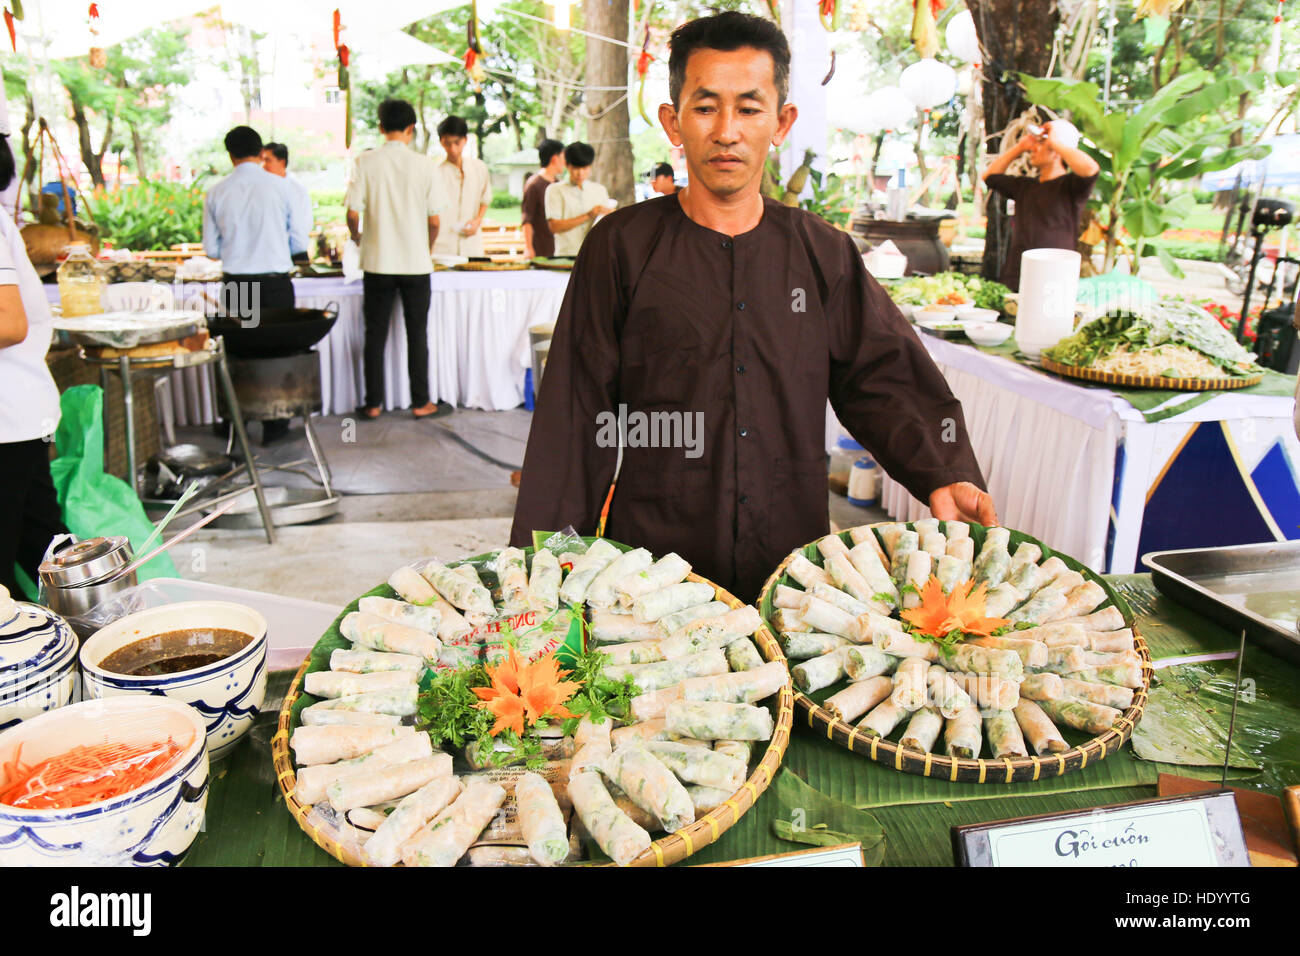 Ho Chi Minh City, Vietnam. 15th Dec, 2016. A staff introduces Vietnamse spring rolls at the Ho Chi Minh City International Food Festival 2016 in Ho Chi Minh City, Vietnam, Dec. 15, 2016. The Ho Chi Minh City International Food Festival 2016, held from Dec. 15 to 18, is showcasing special dishes from 18 countries and territories with a total of 150 booths. A wide range of activities, including a cooking contest, a gastronomy photo exhibition, bartender demonstrations and music shows will also be held during the event. © Hoang Thi Huong/Xinhua/Alamy Live News Stock Photo